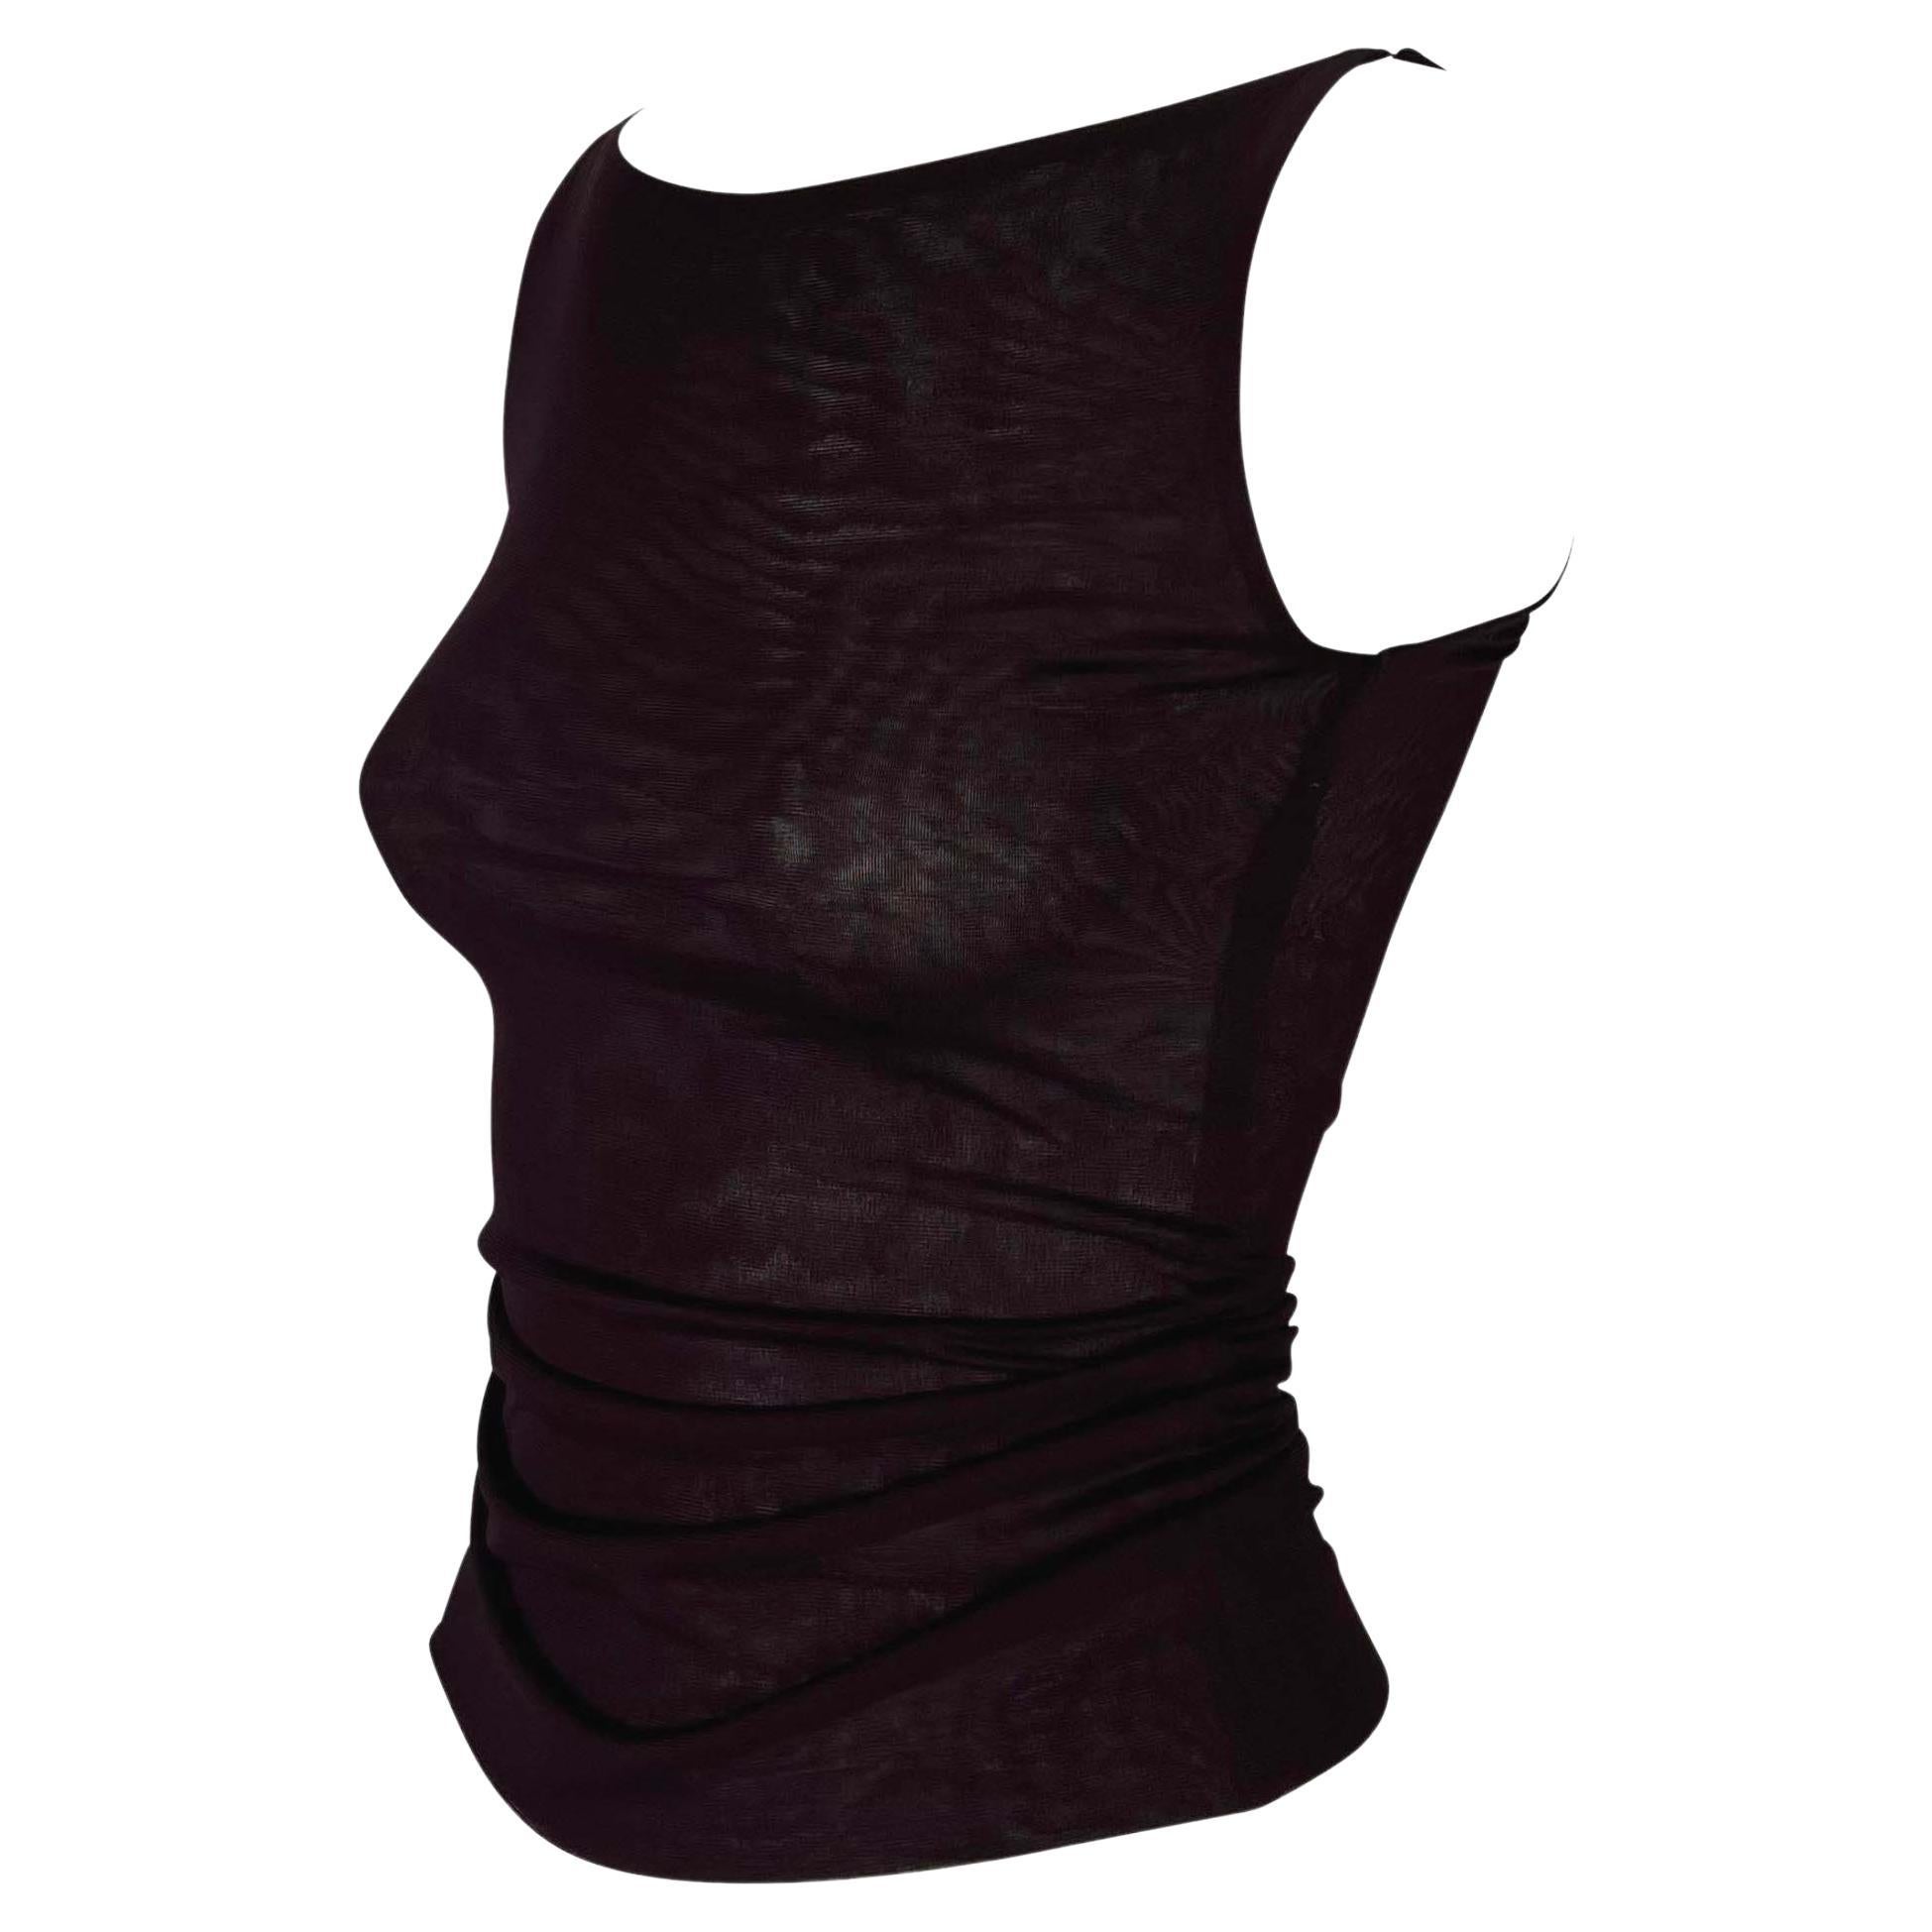 TheRealList presents: a beautiful purple stretch Gucci tank top, designed by Tom Ford. From the Spring/Summer 1998 collection, this effortlessly chic semi-sheer top features a wide Sabrina-style neckline and narrowly meets at the top of the